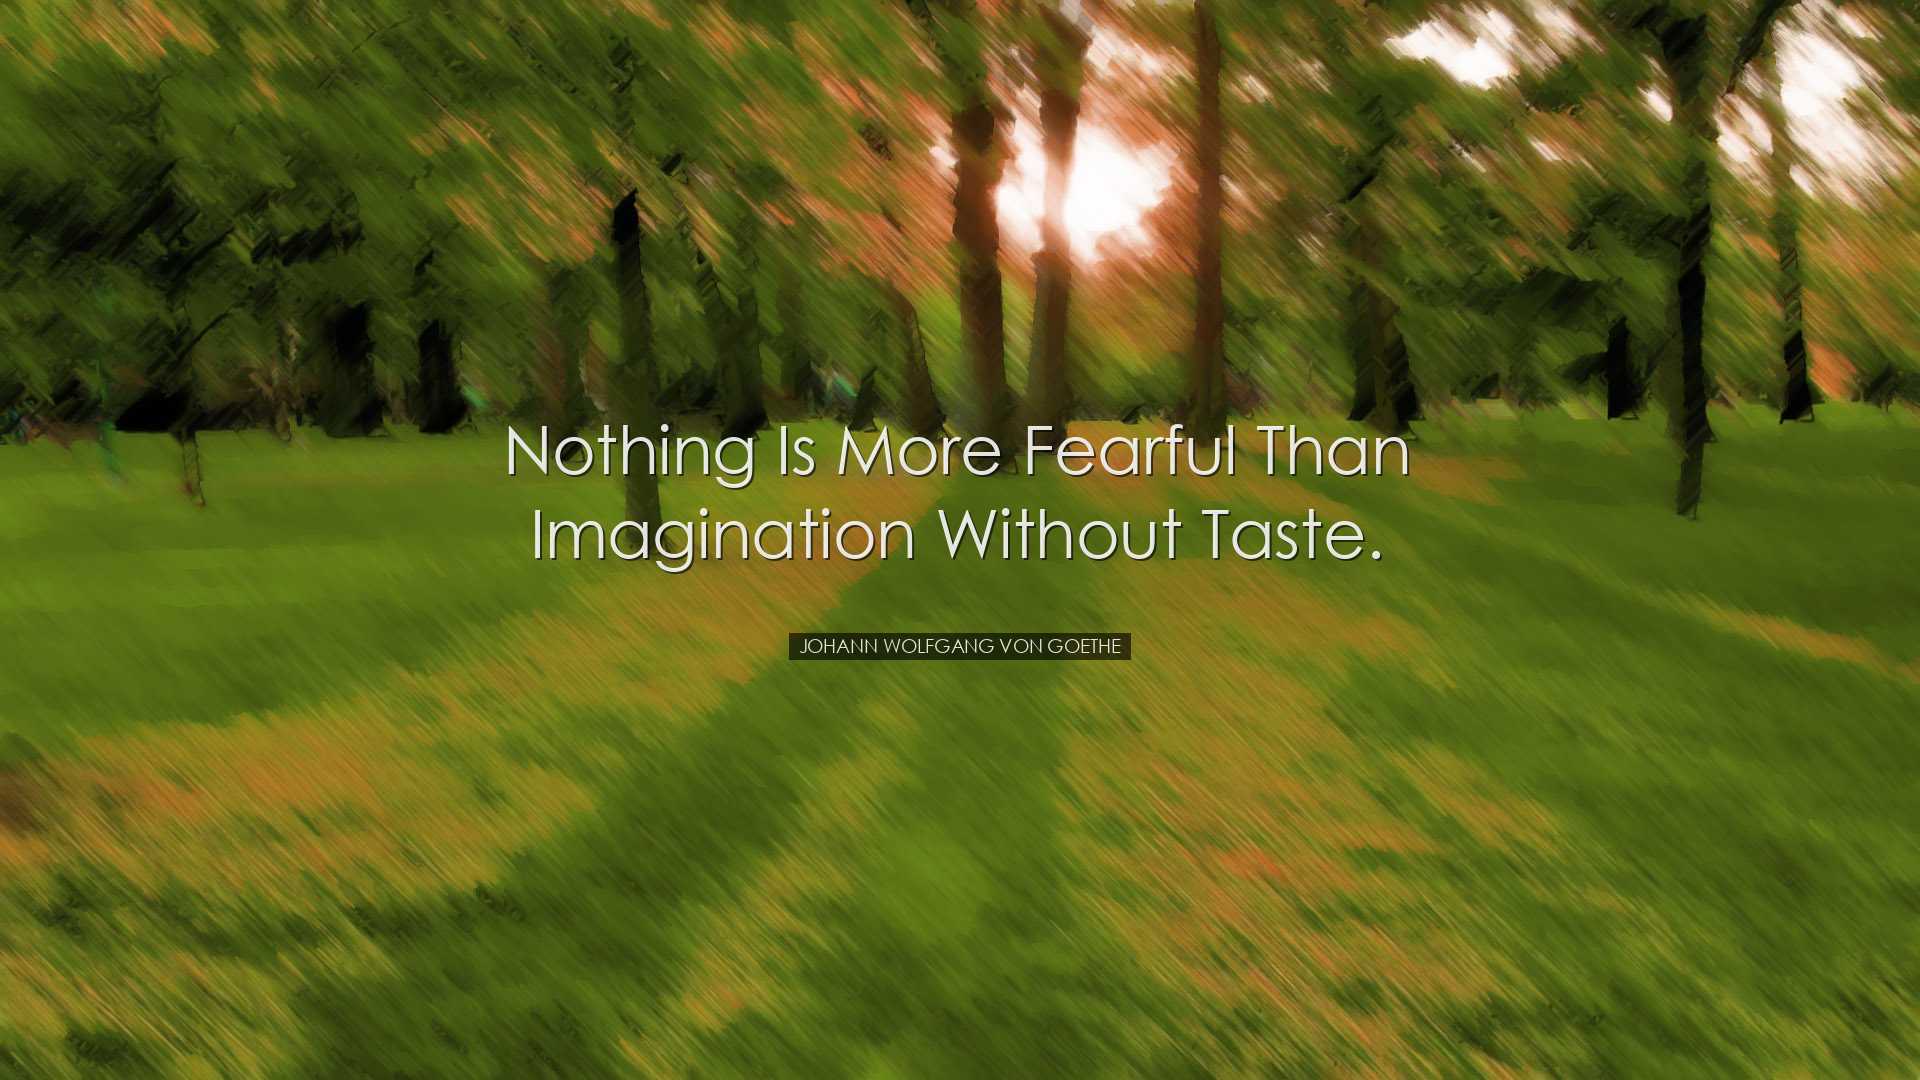 Nothing is more fearful than imagination without taste. - Johann W